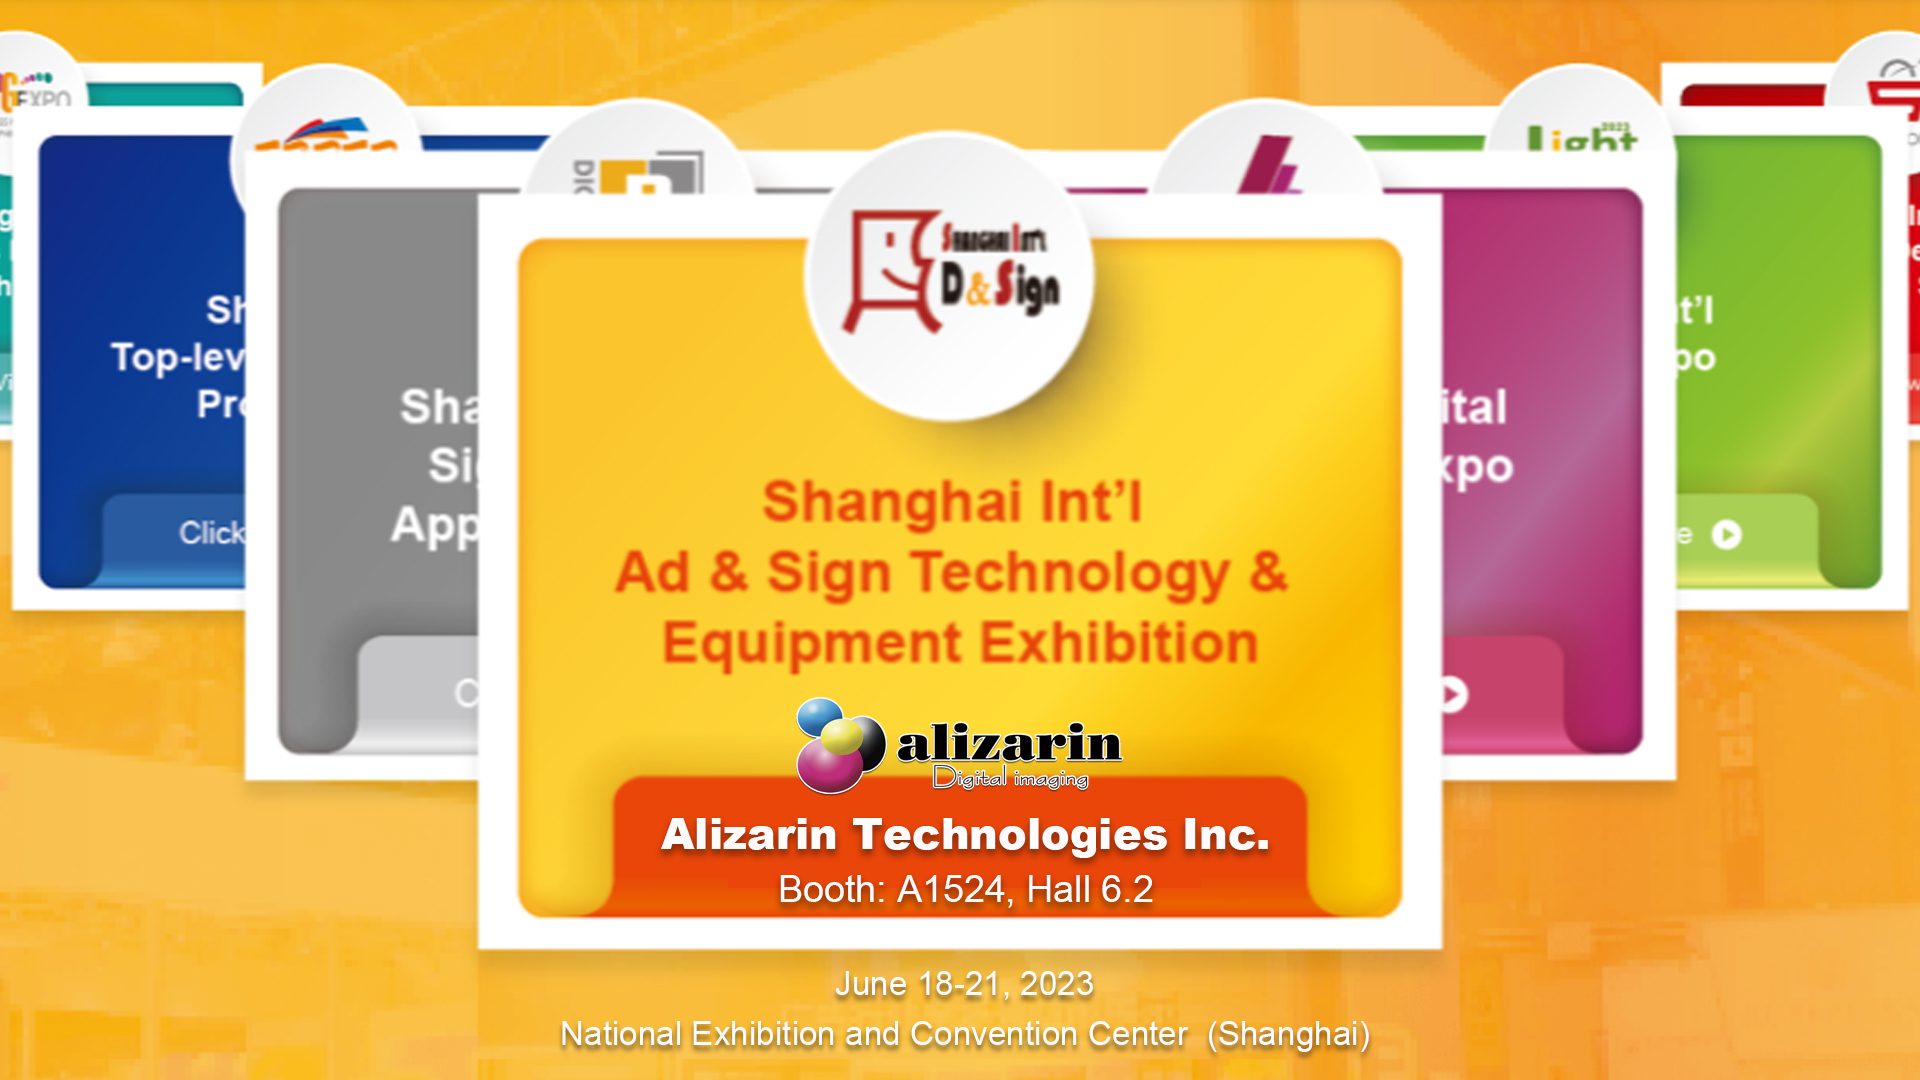 Welcome To Visit Alizarin Technologies Inc. Of APPP EXPO 2023,Shanghai